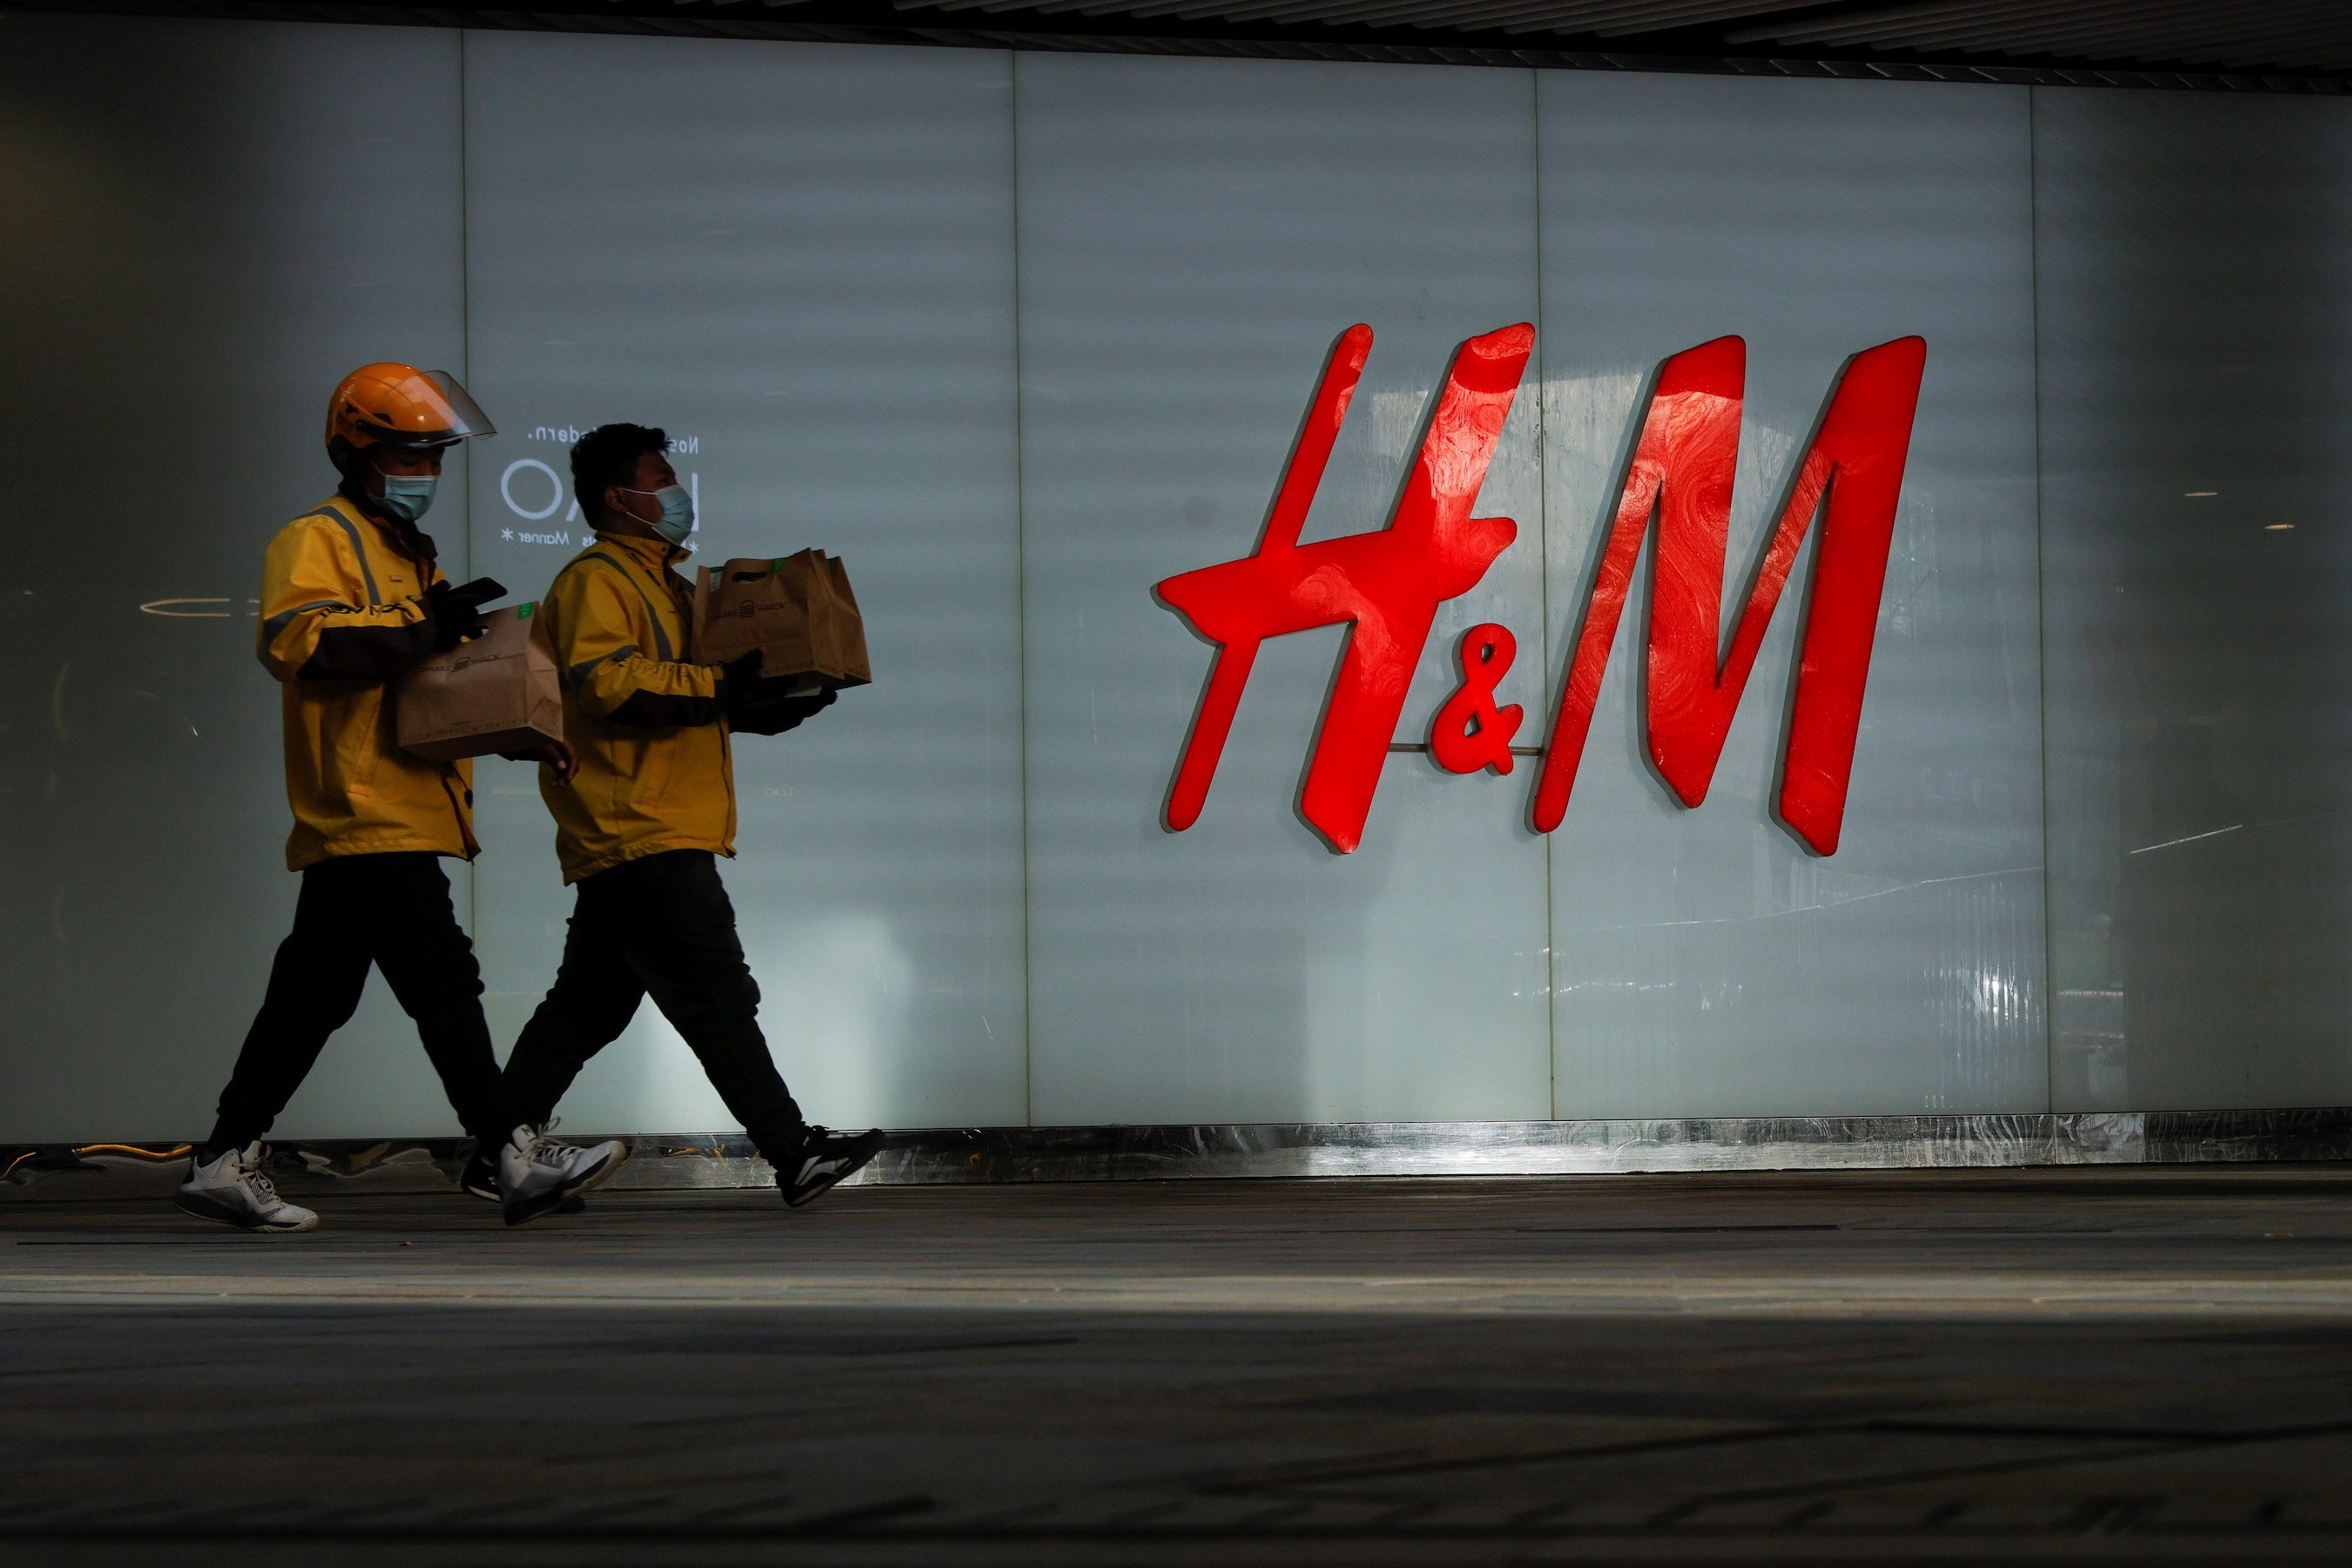 H&M vows to rebuild trust in China after Xinjiang backlash